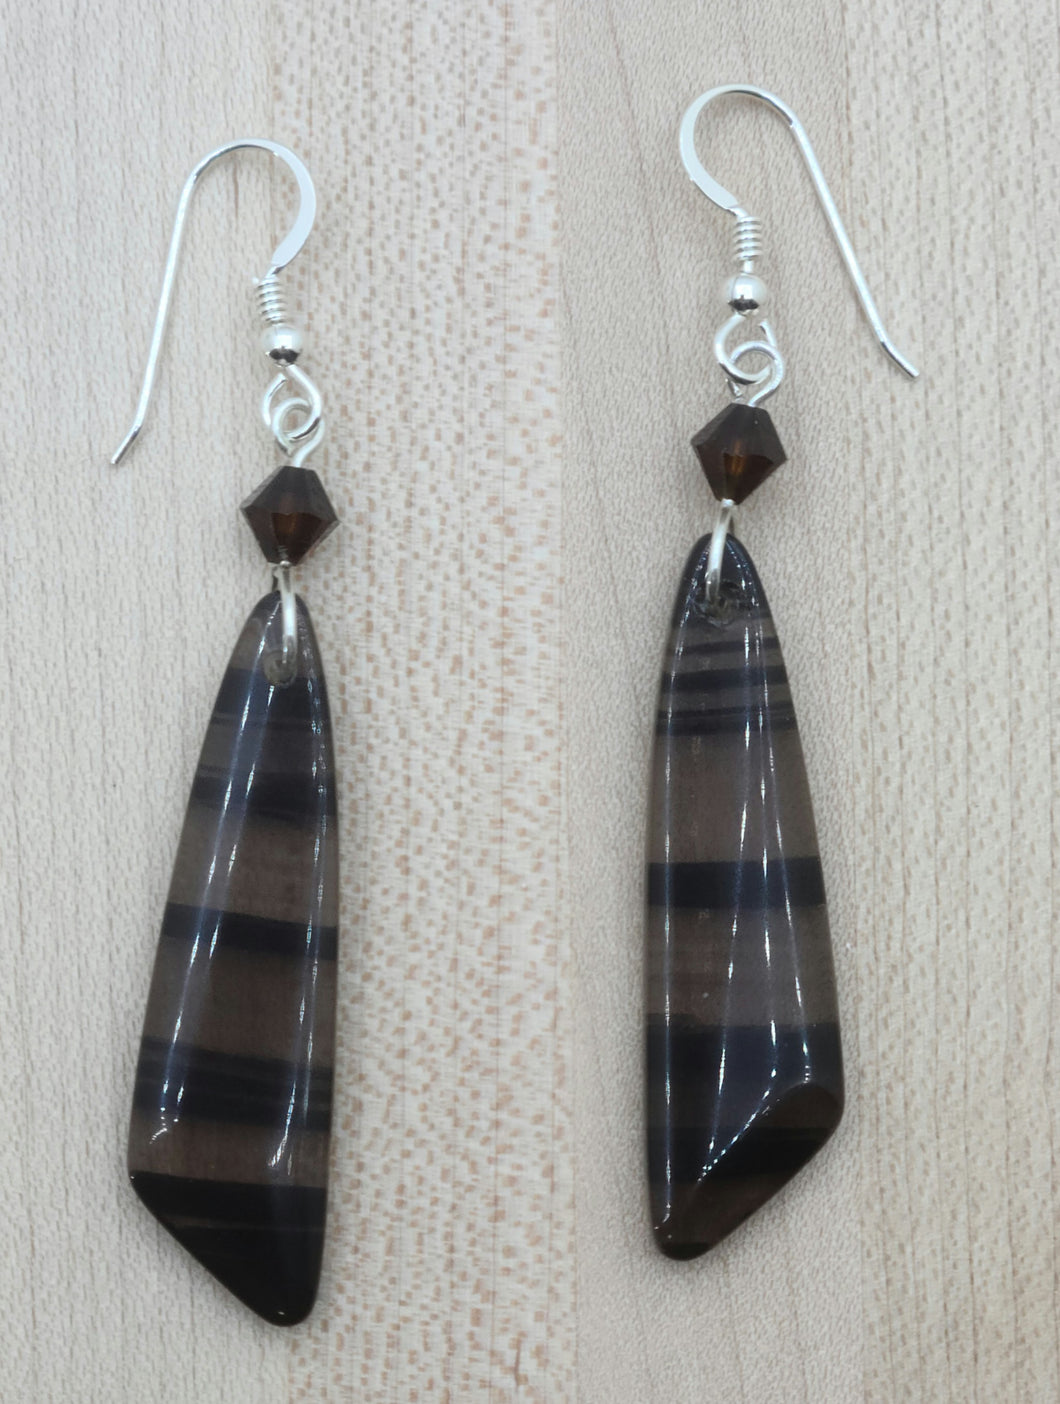 Midnight lace obsidian with translucent light brown with dark cocoa strikes hand from mocca crystals* in these lovely earrings.